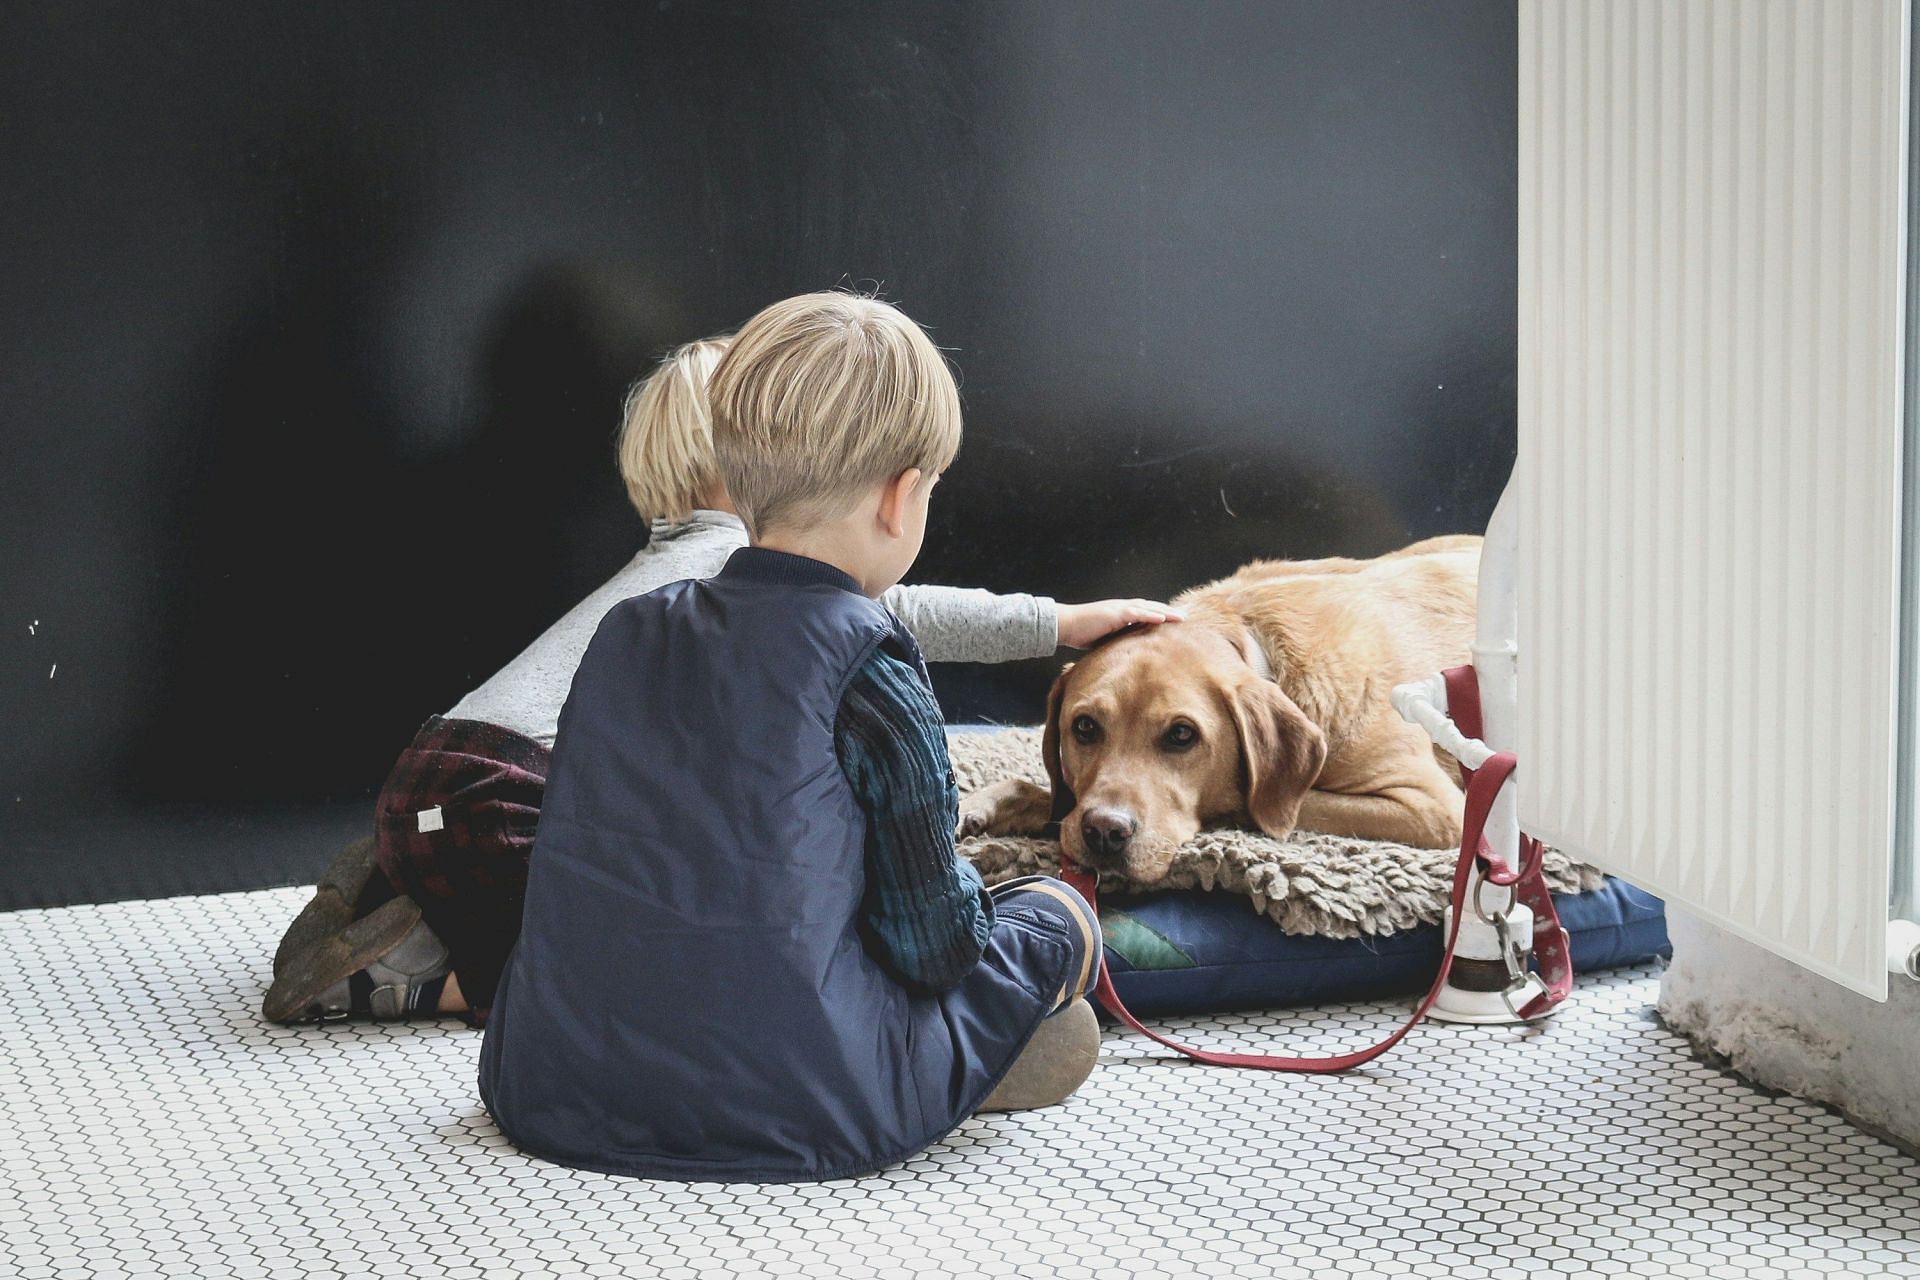 Having a dog can engage your kid in more physical activity (Image by Sabina Fratila/Unsplash)